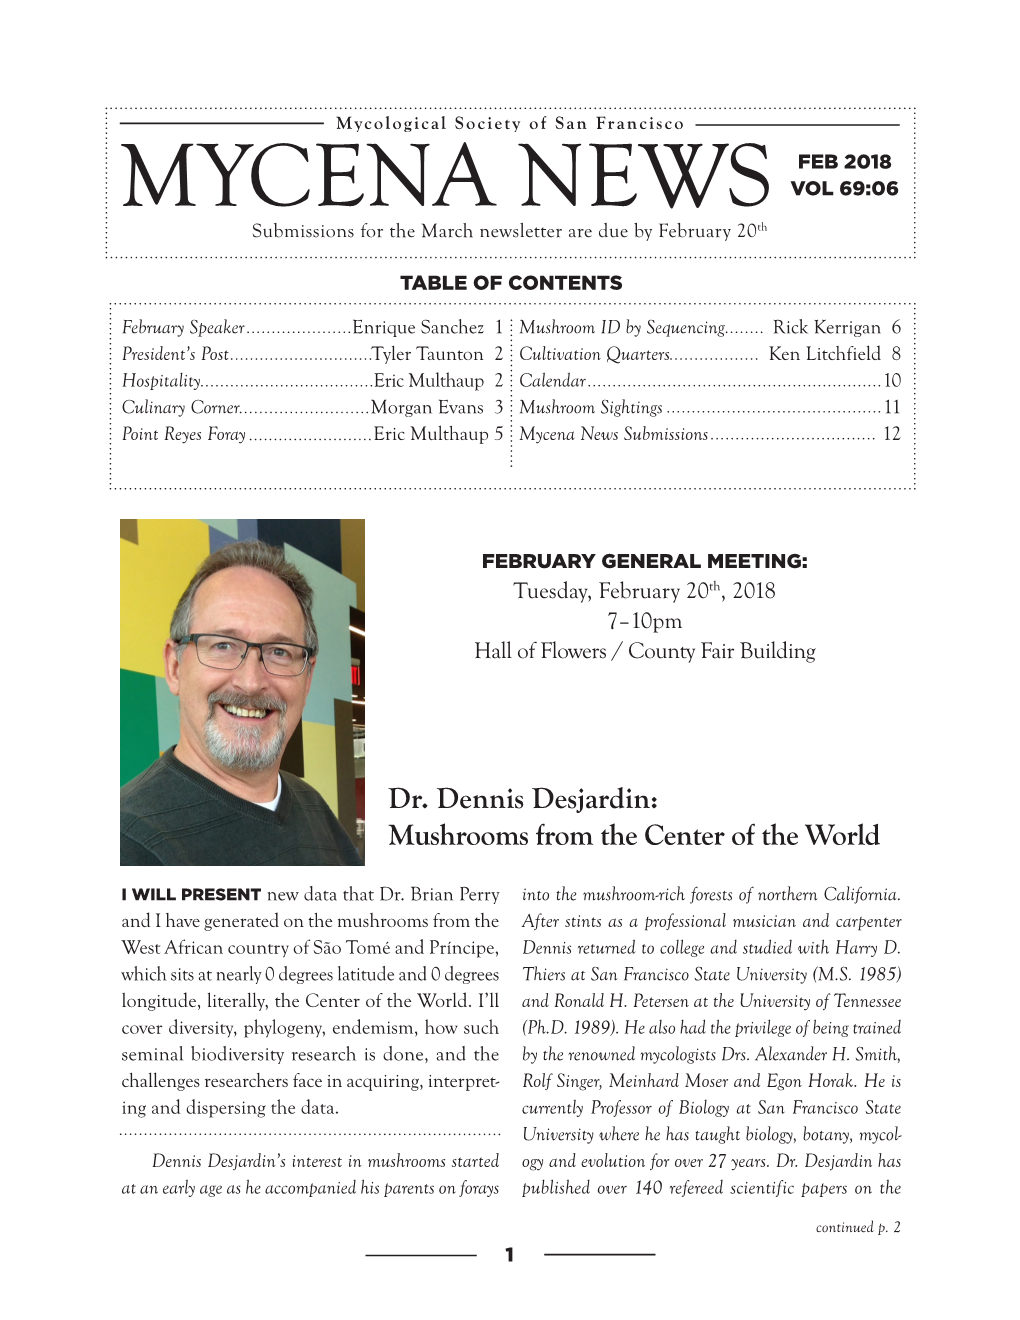 MYCENA NEWS VOL 69:06 Submissions for the March Newsletter Are Due by February 20Th